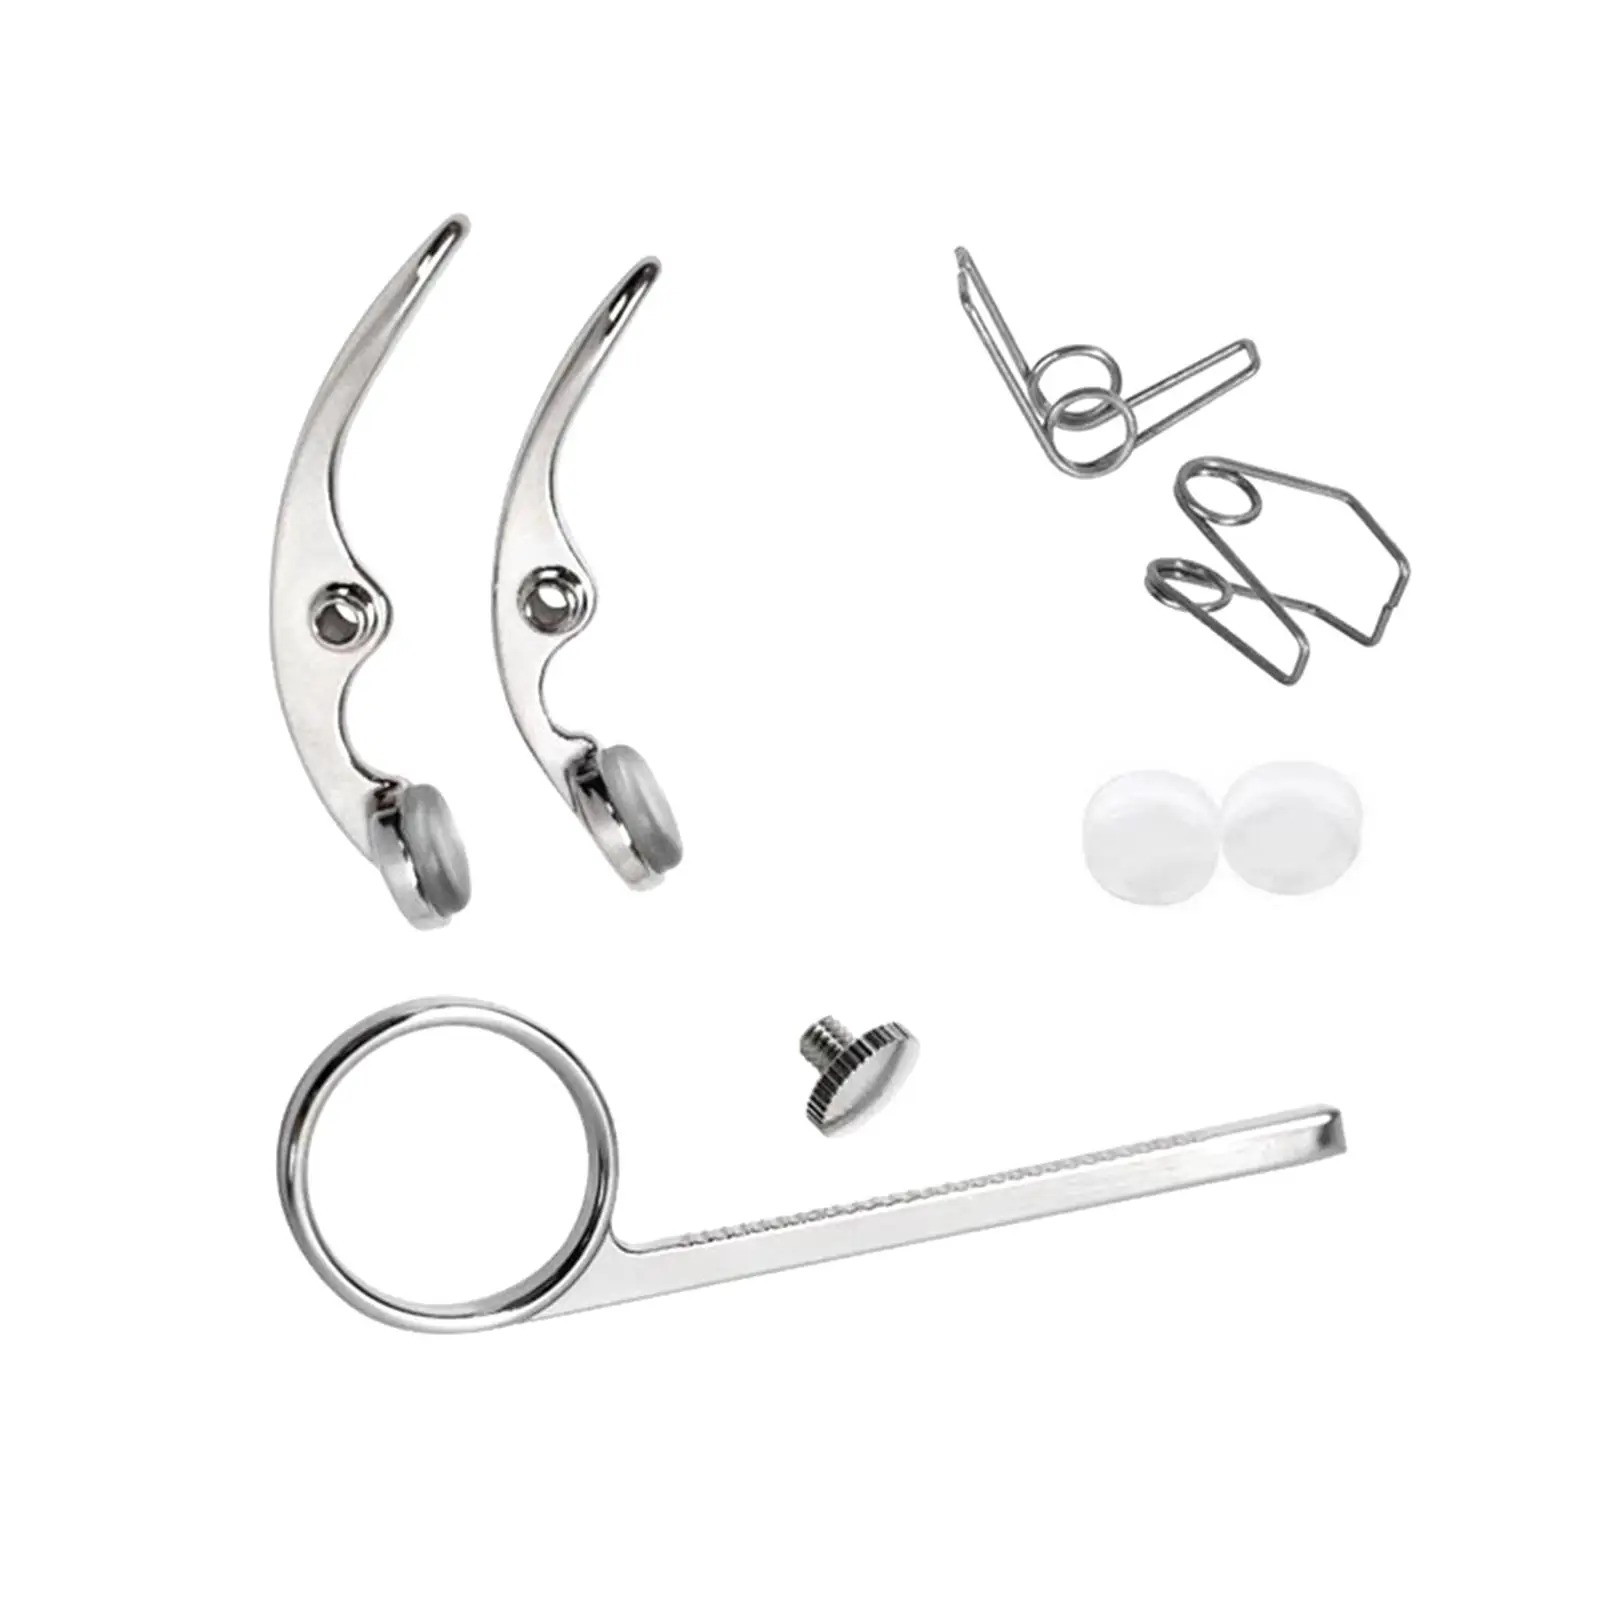 Professional Trumpet Water Value Accessories Trumpet Accessory for Repairing